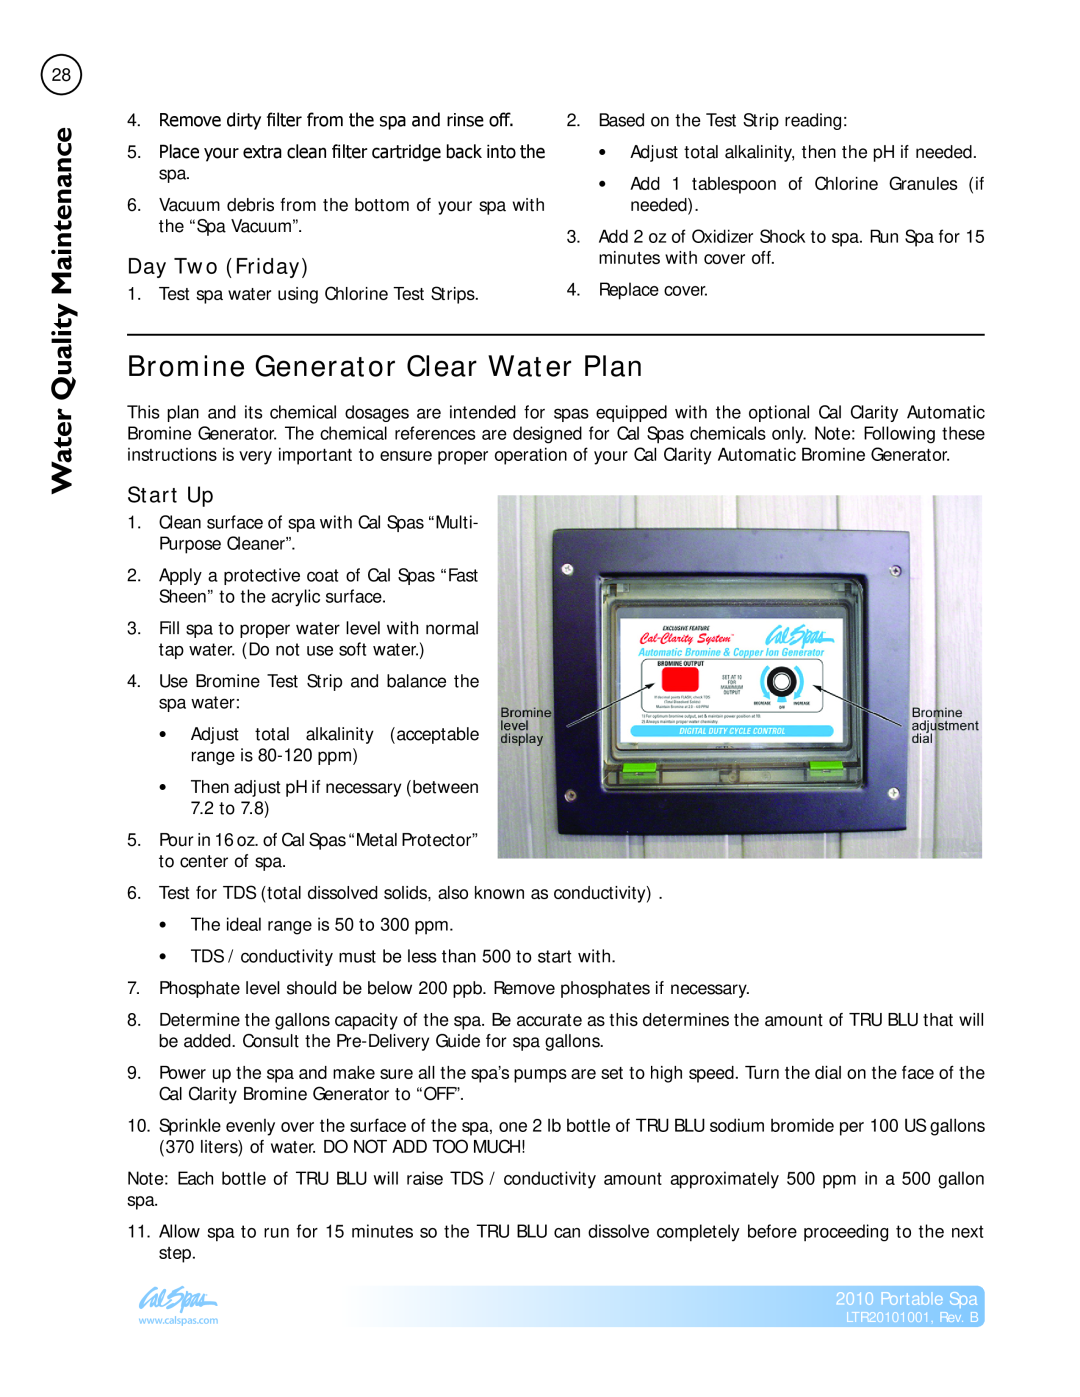 Cal Spas LTR20101001 manual Maintenance, Water Quality, Bromine Generator Clear Water Plan, Day Two Friday, Start Up 